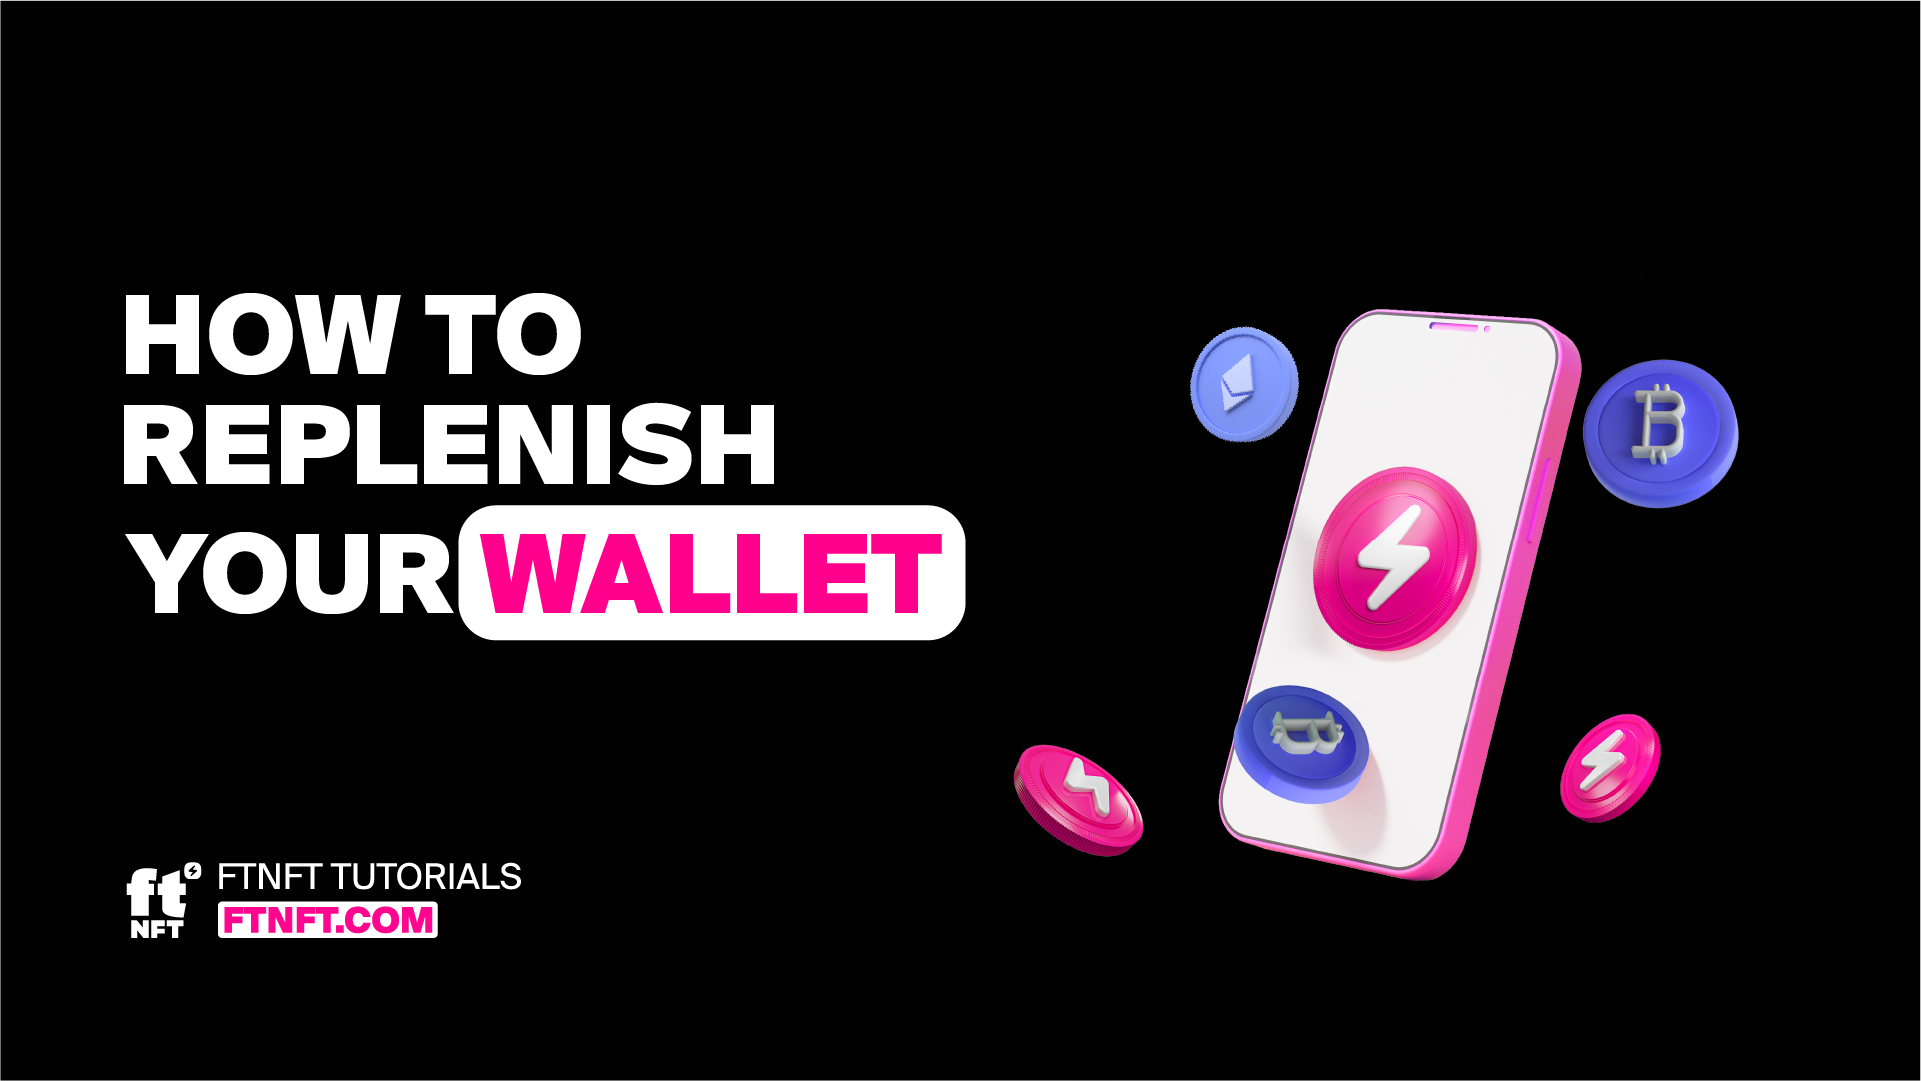 873-how-to-replenish-your-wallet-16910544467365.png